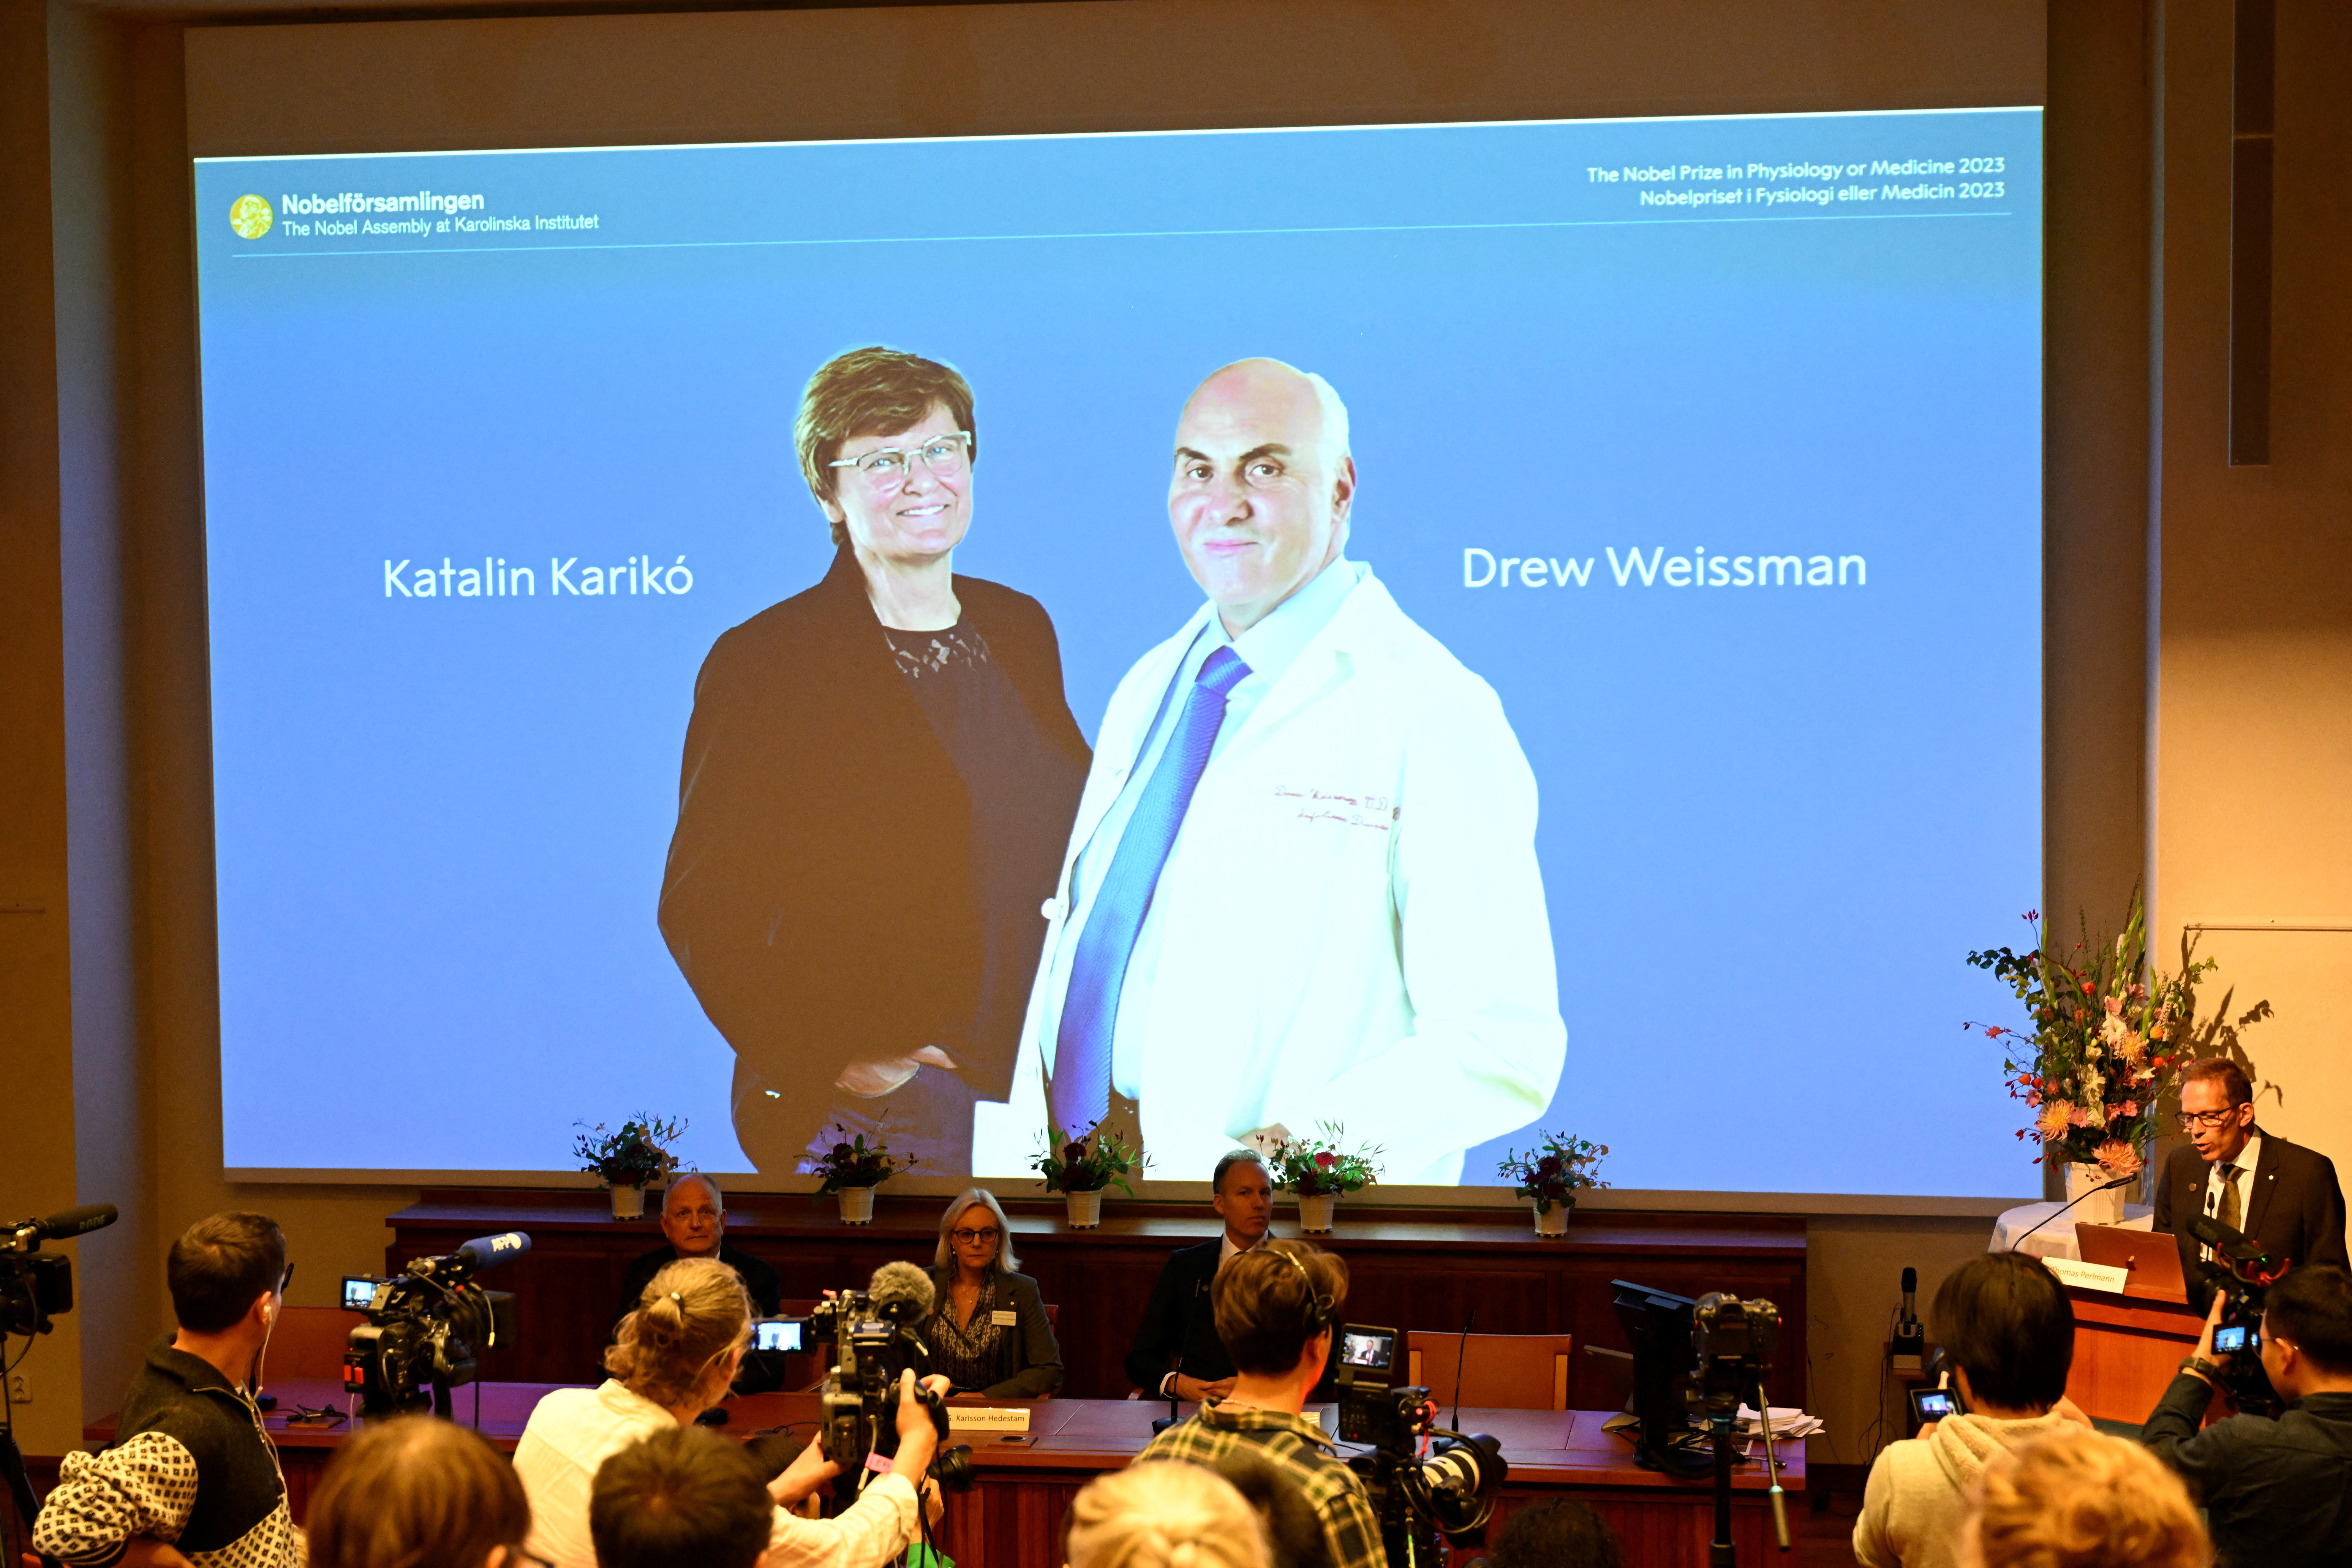 Hungarian and U.S. scientists win medicine Nobel for COVID-19 vaccine work